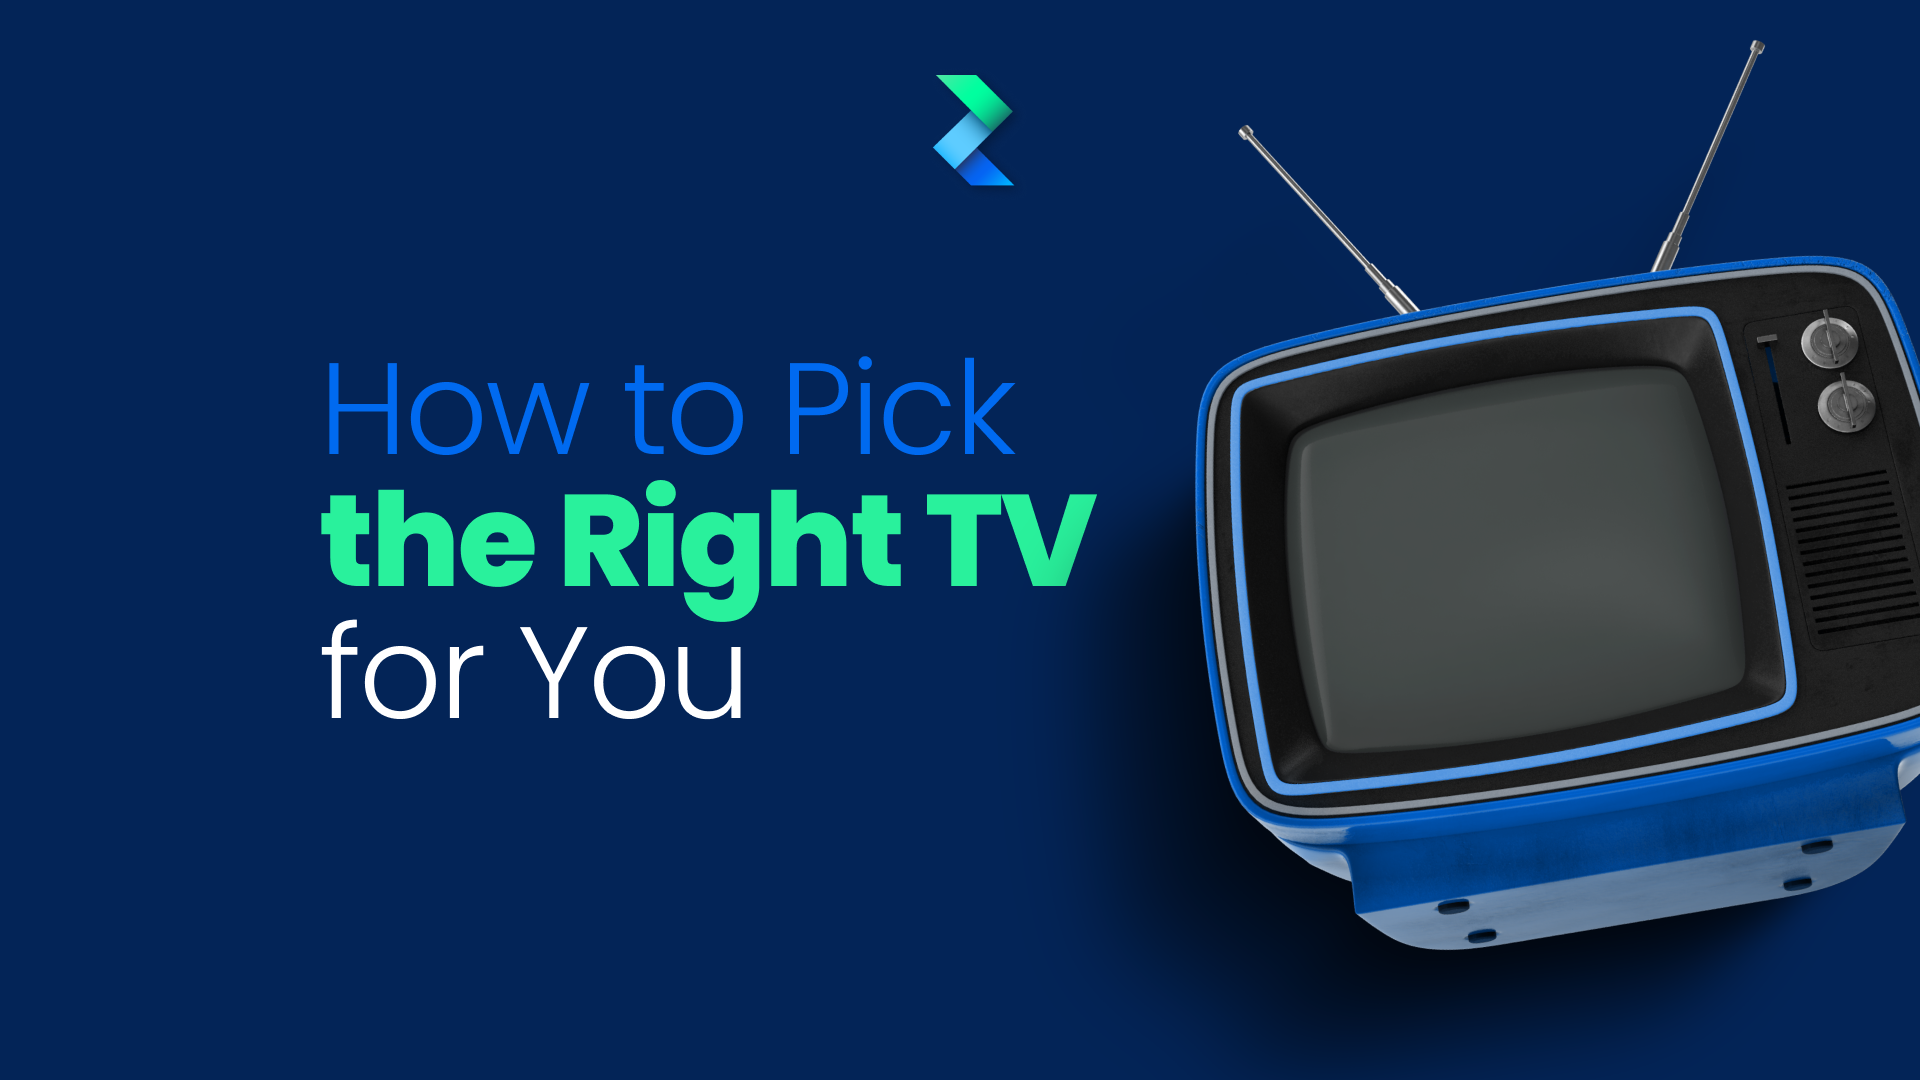 How to Pick the Right TV for You